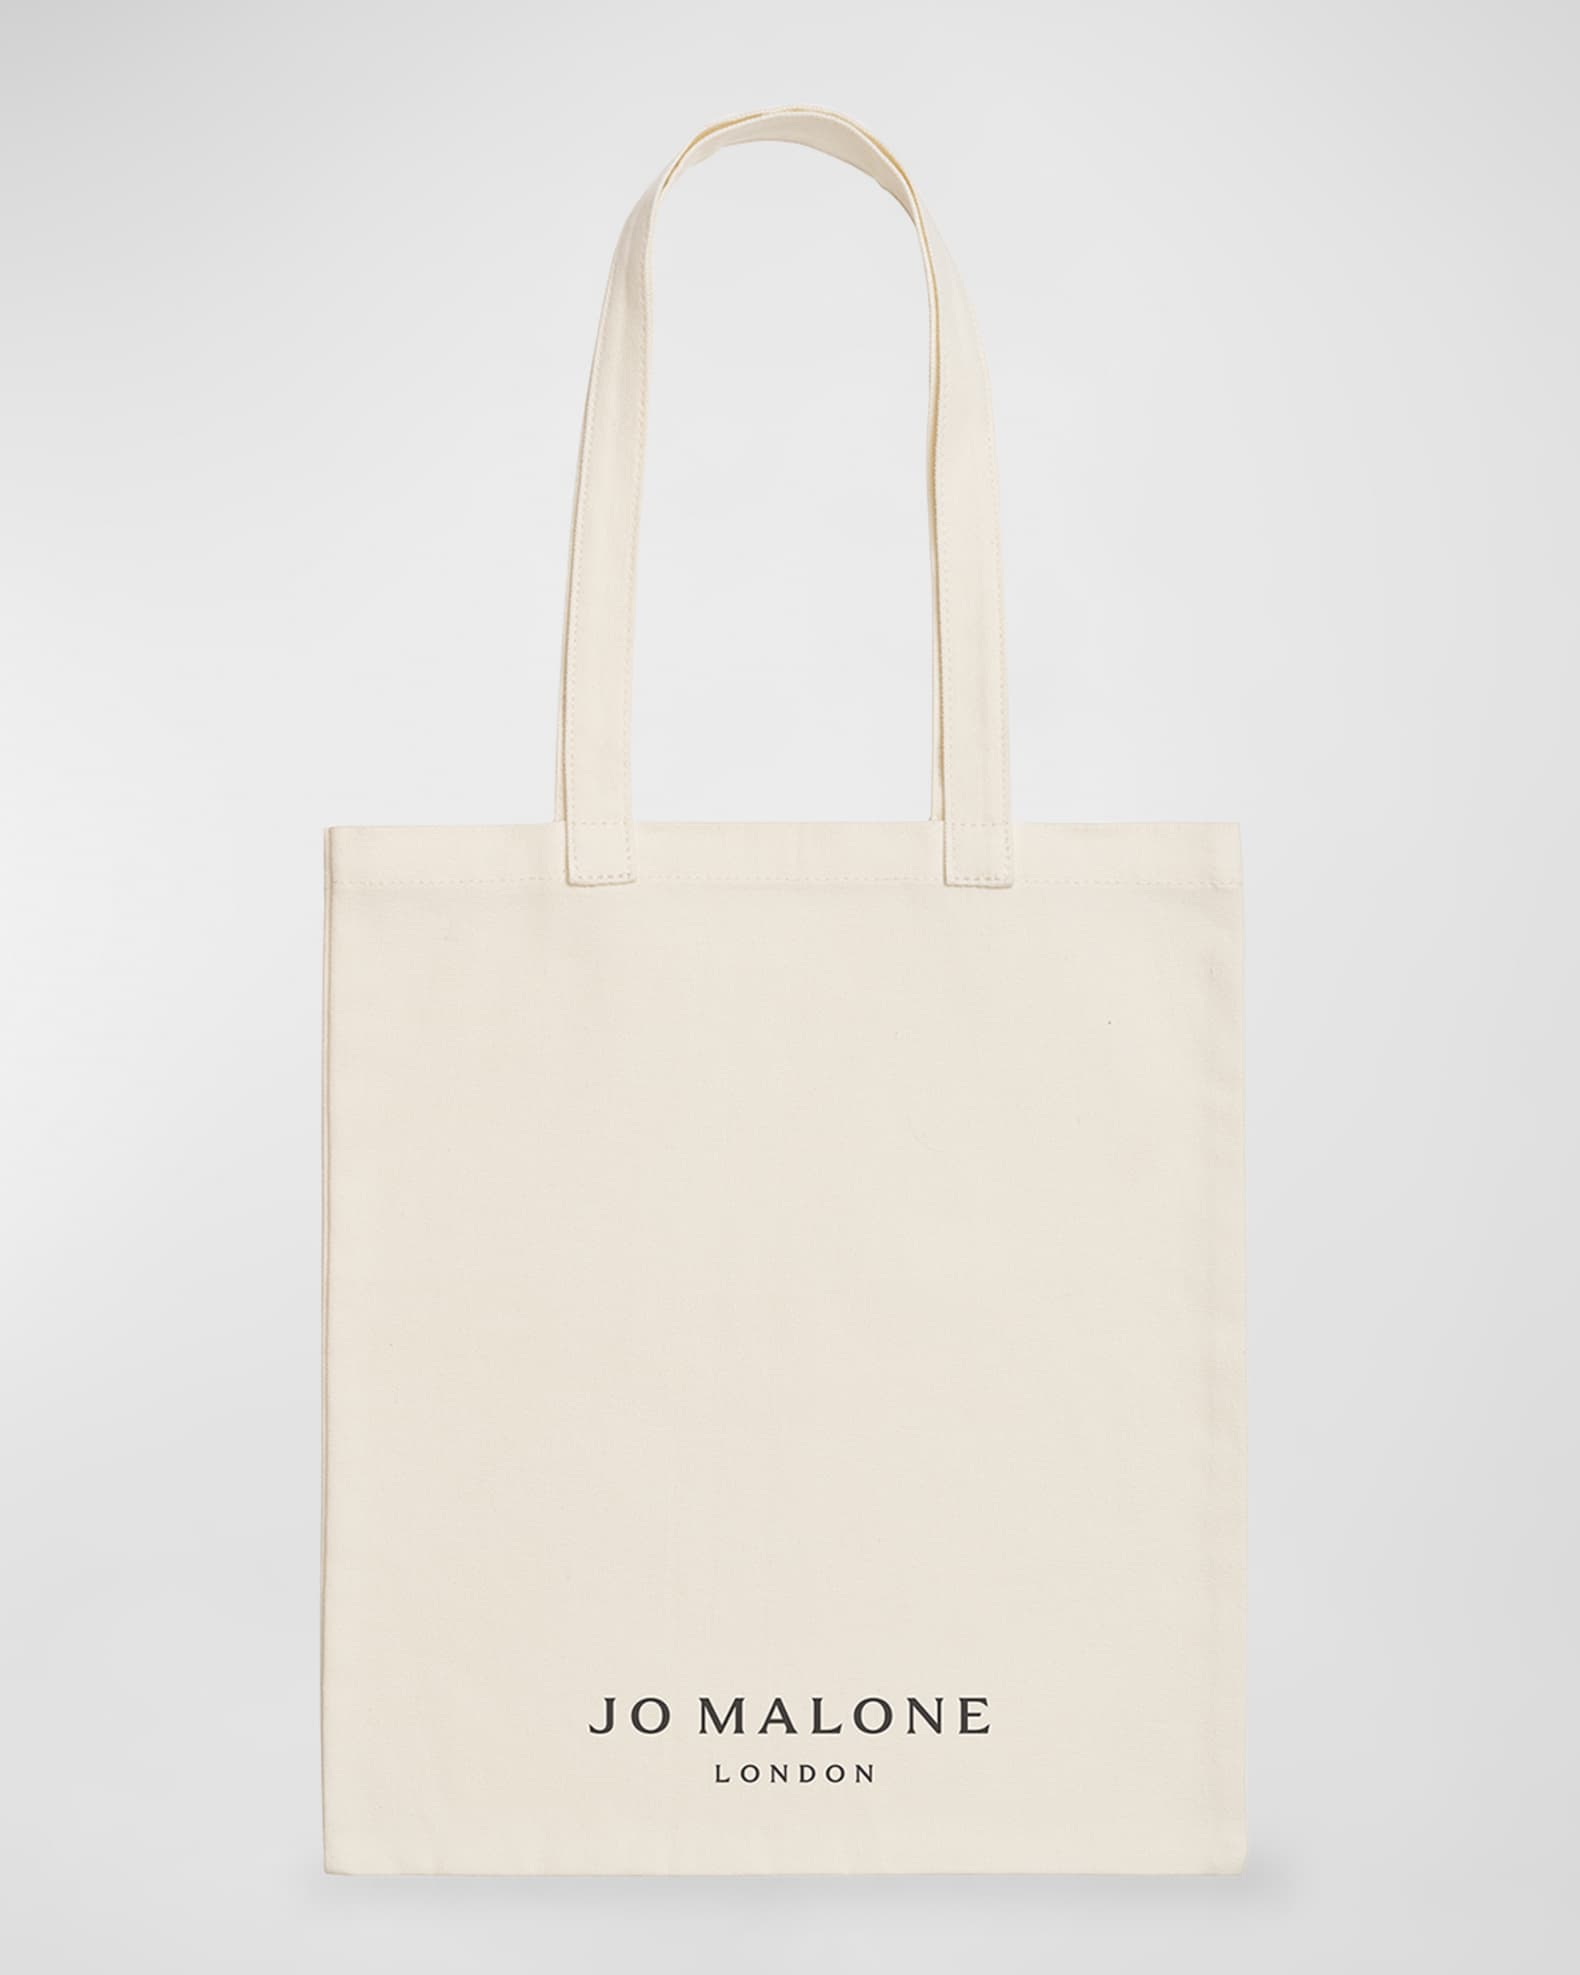 Jo Malone London Holiday Tote Bag, Yours with any $120 Jo Malone London ...